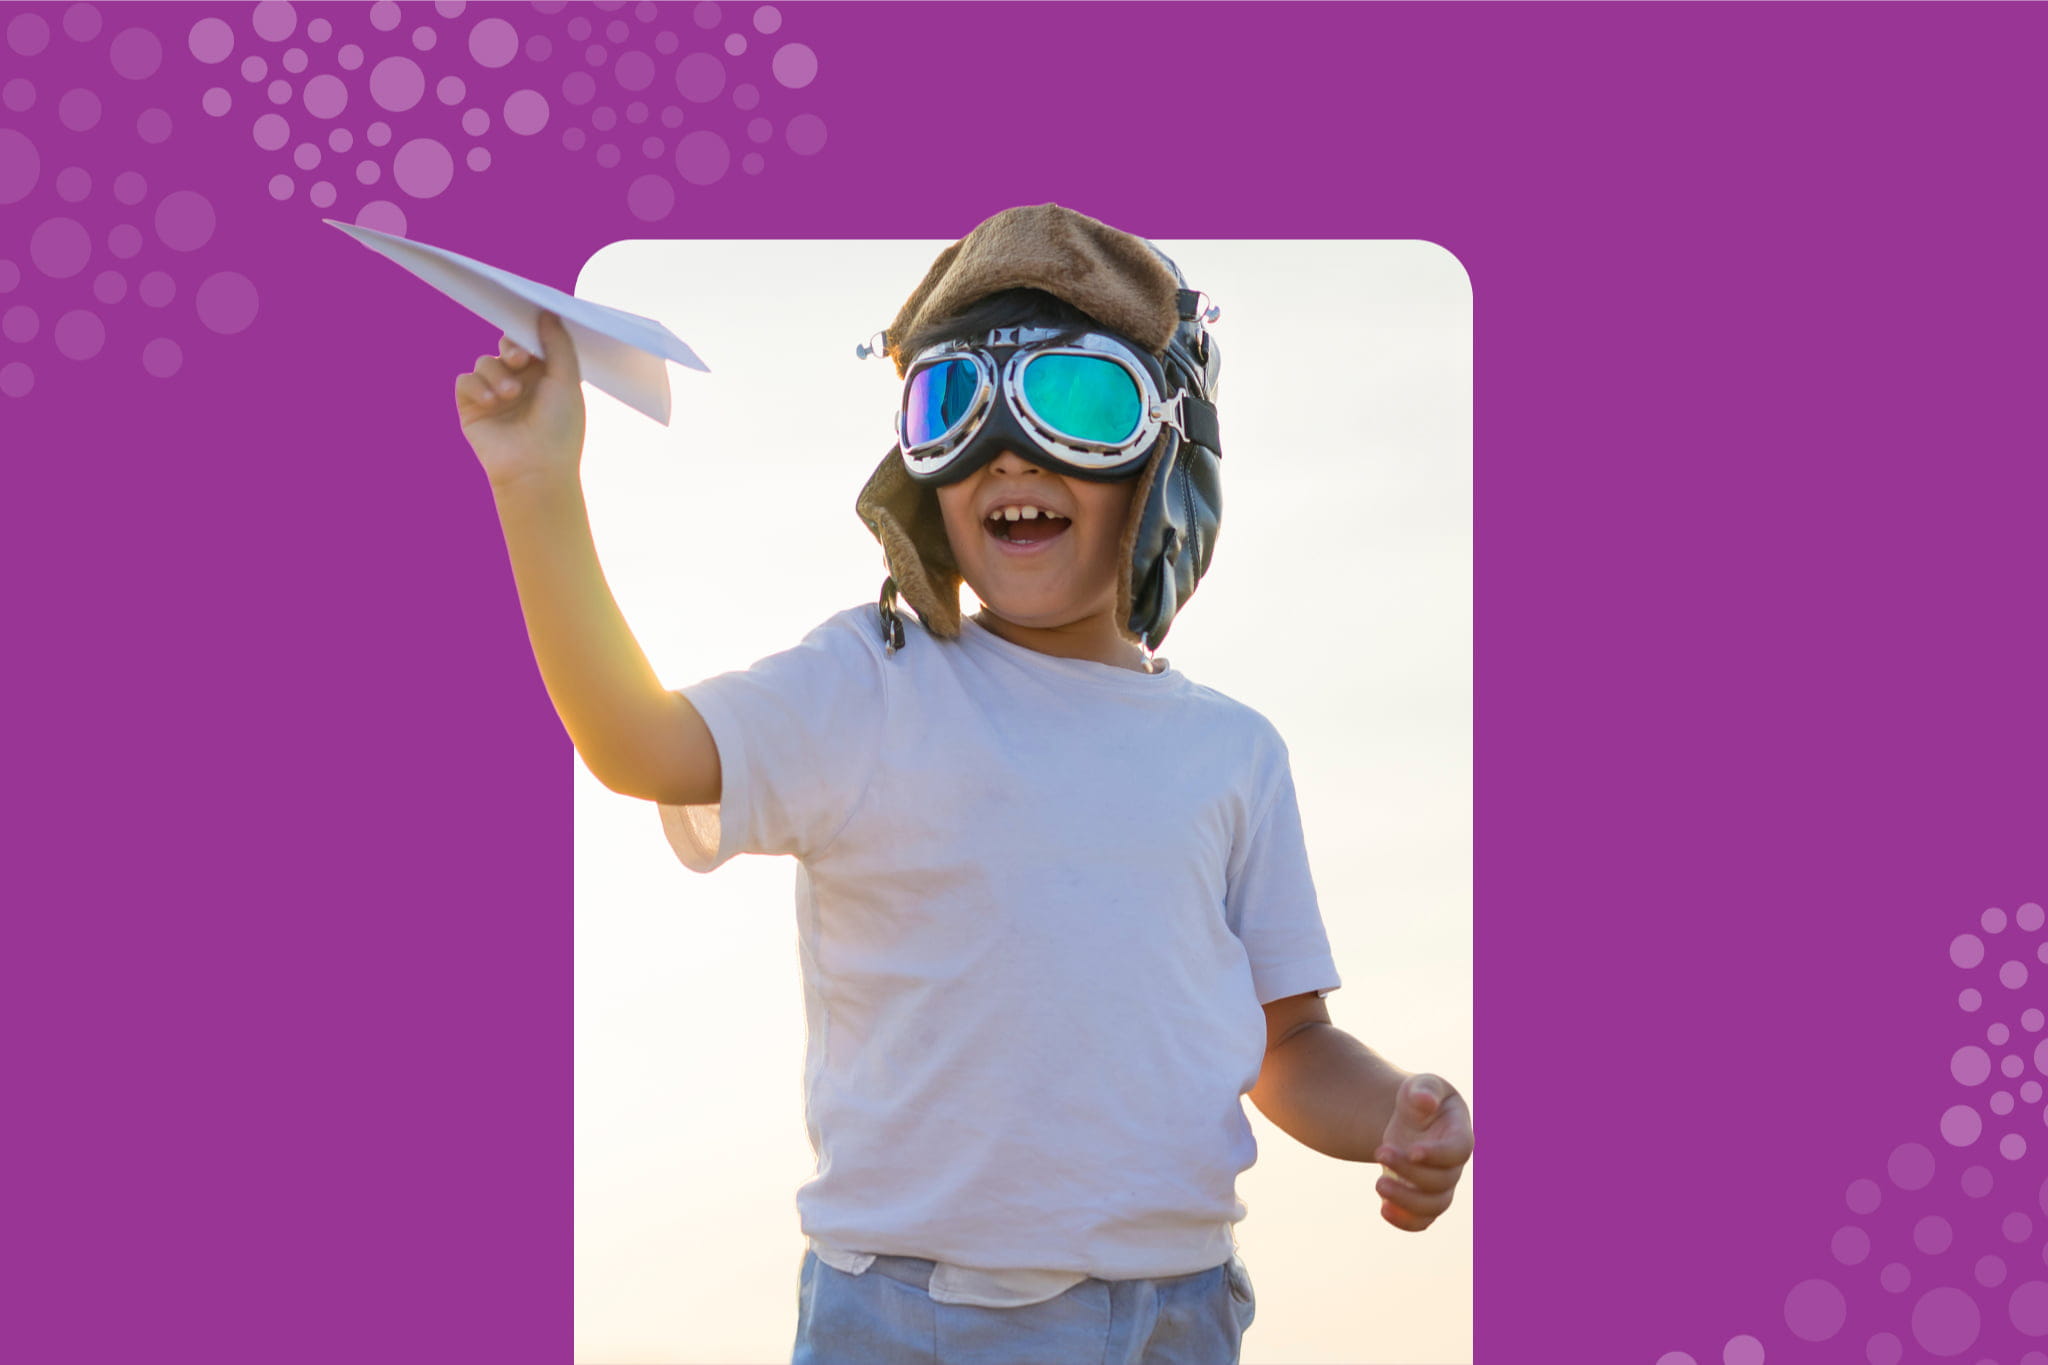 a kid wearing hat and goggles playing with paper plane